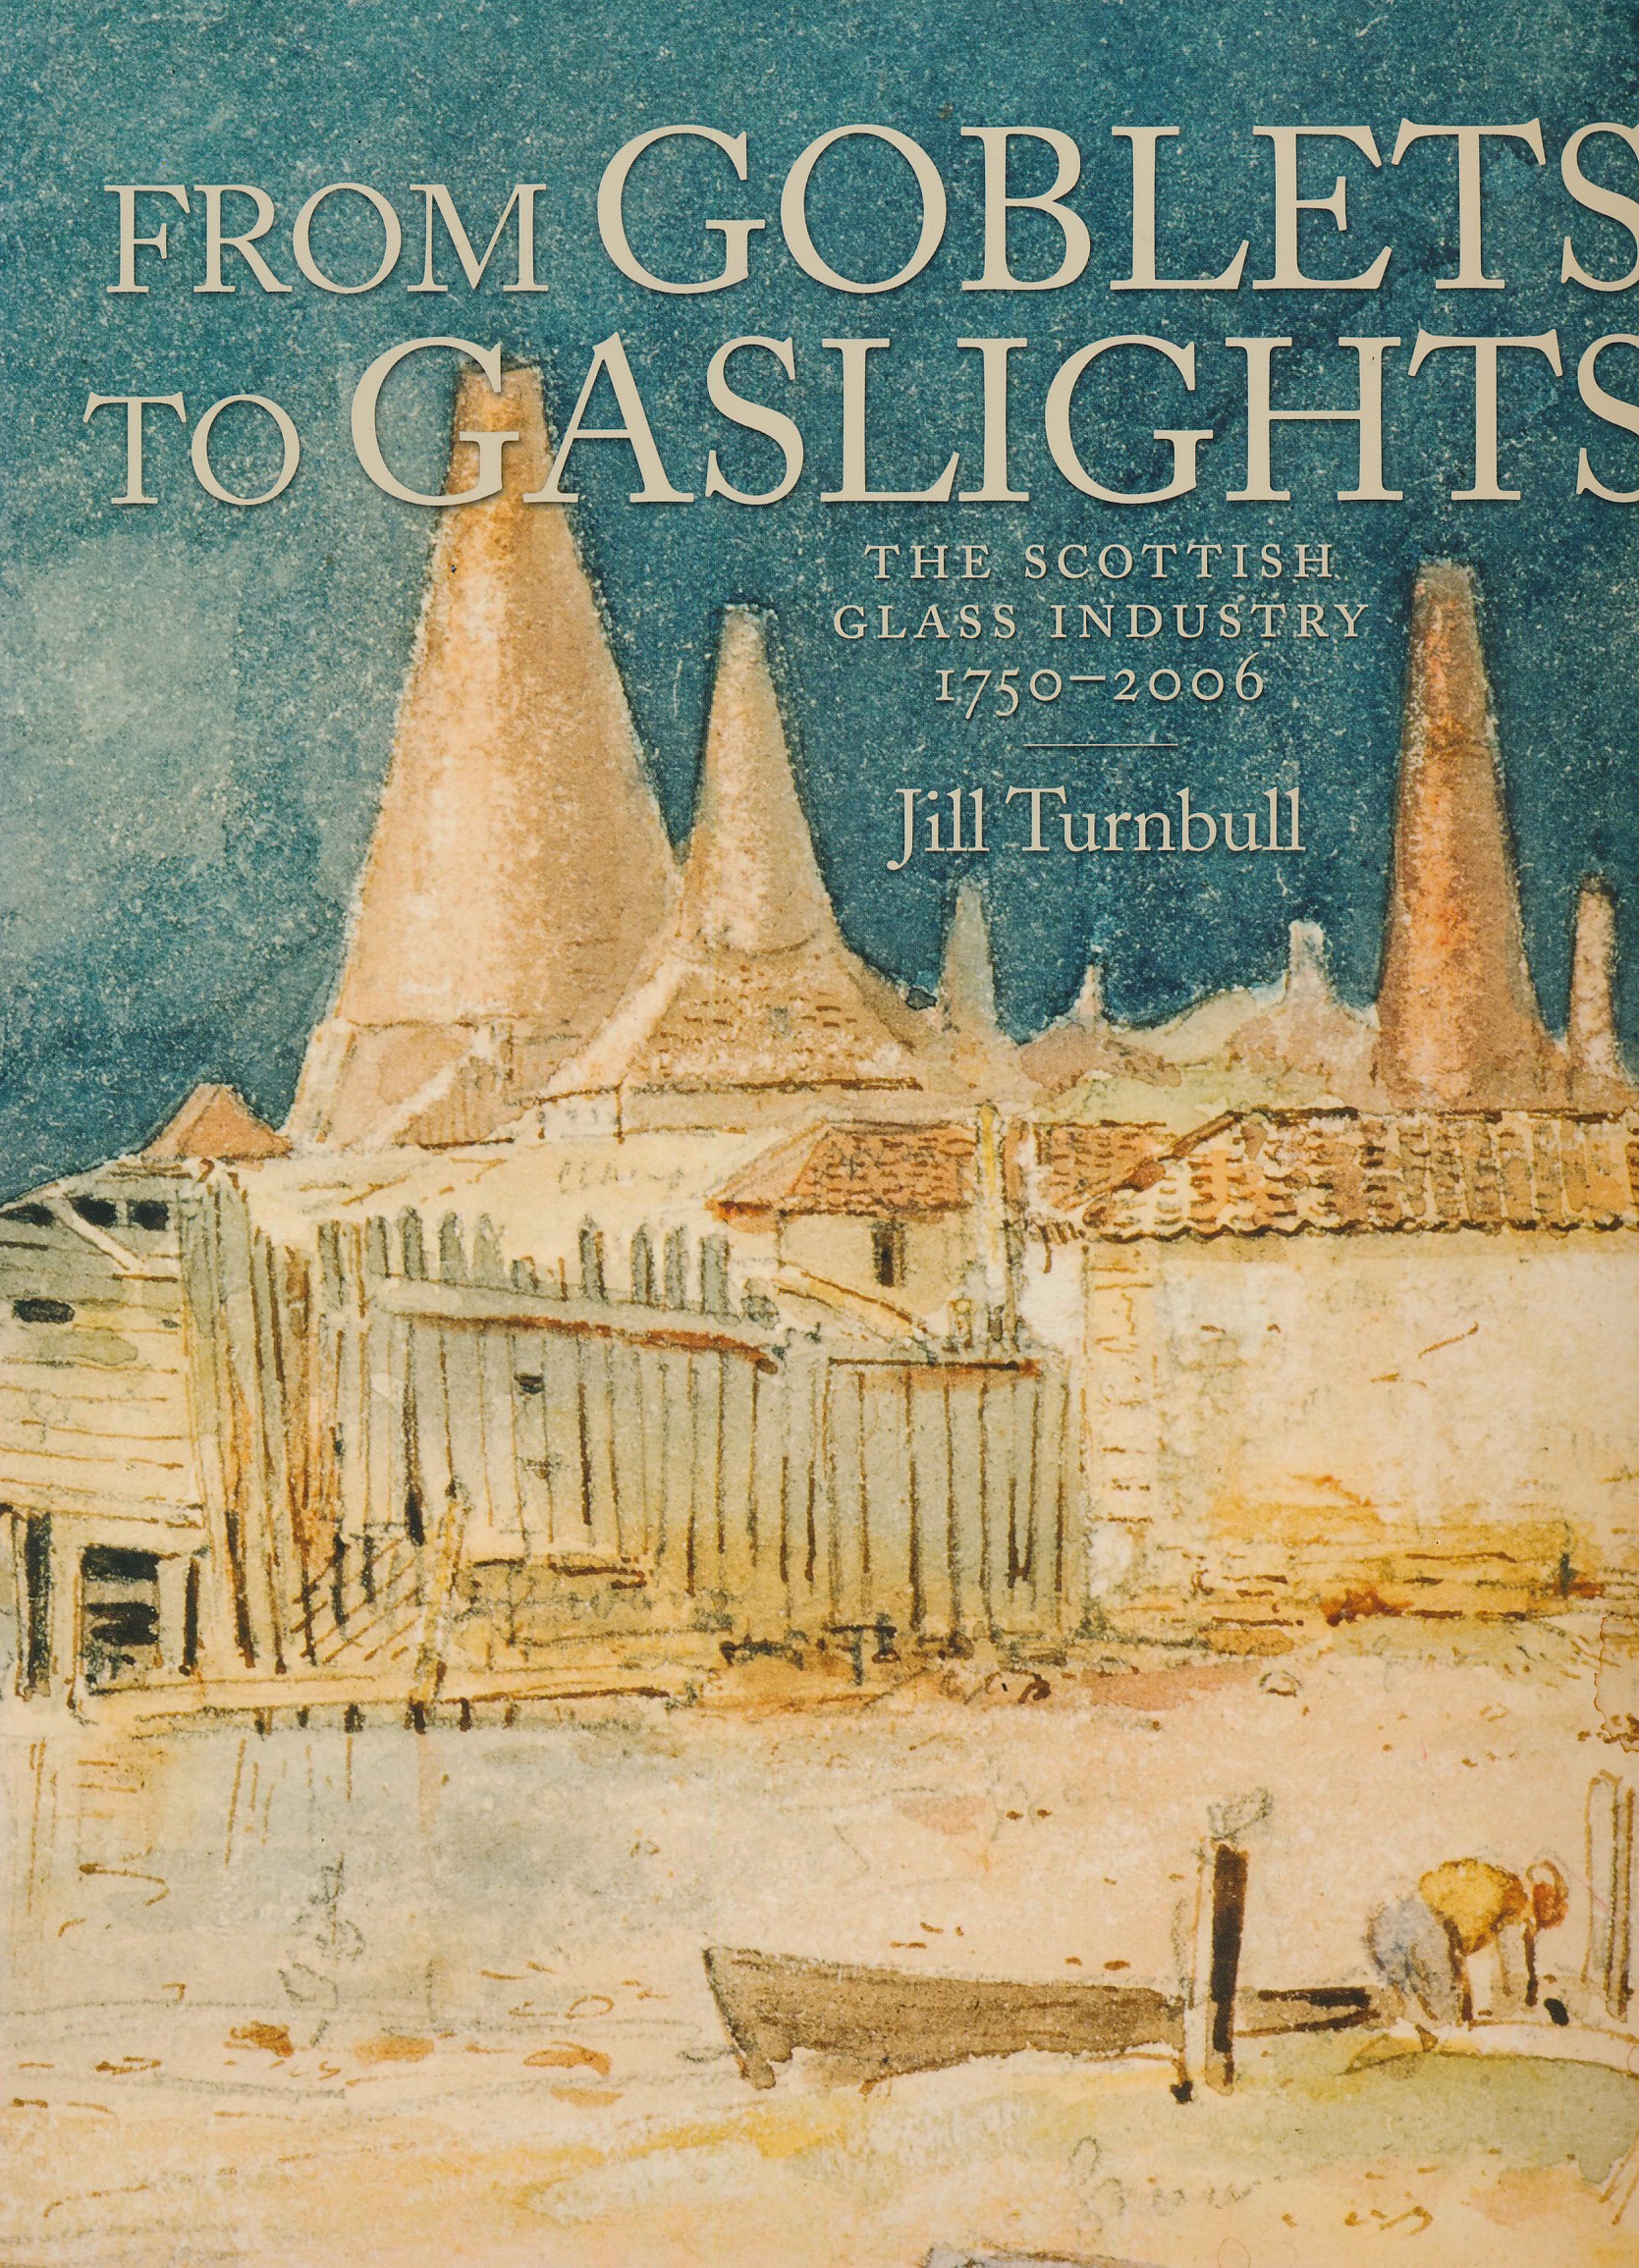 From Goblets to Gaslights.  The Scottish Glass Industry 1750-2006